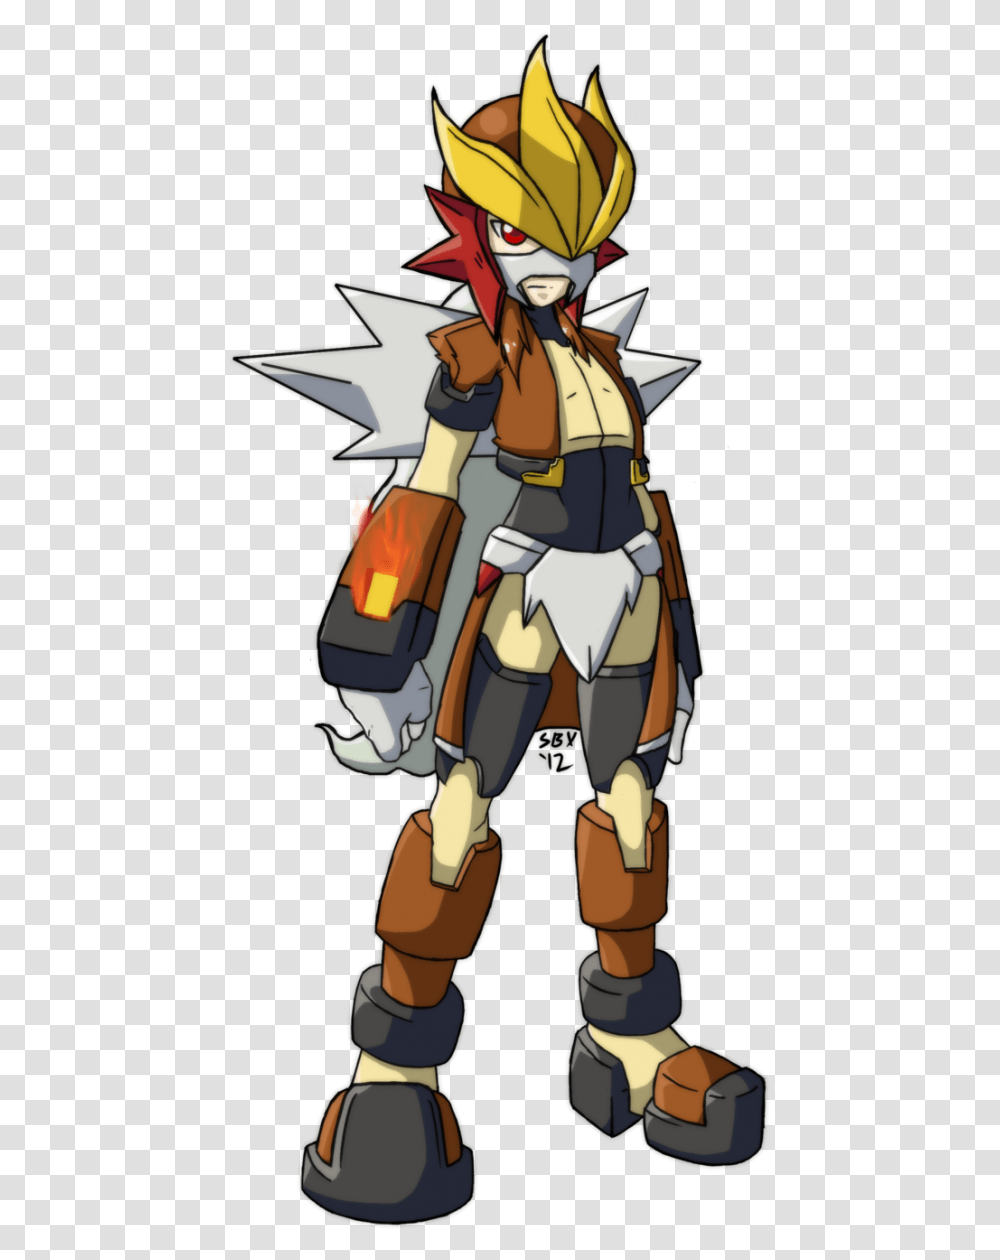 Model E Entei Zx By Silver Blur X D4vny1y Fanmade Biometals Megaman Zx, Comics, Book, Toy, Manga Transparent Png